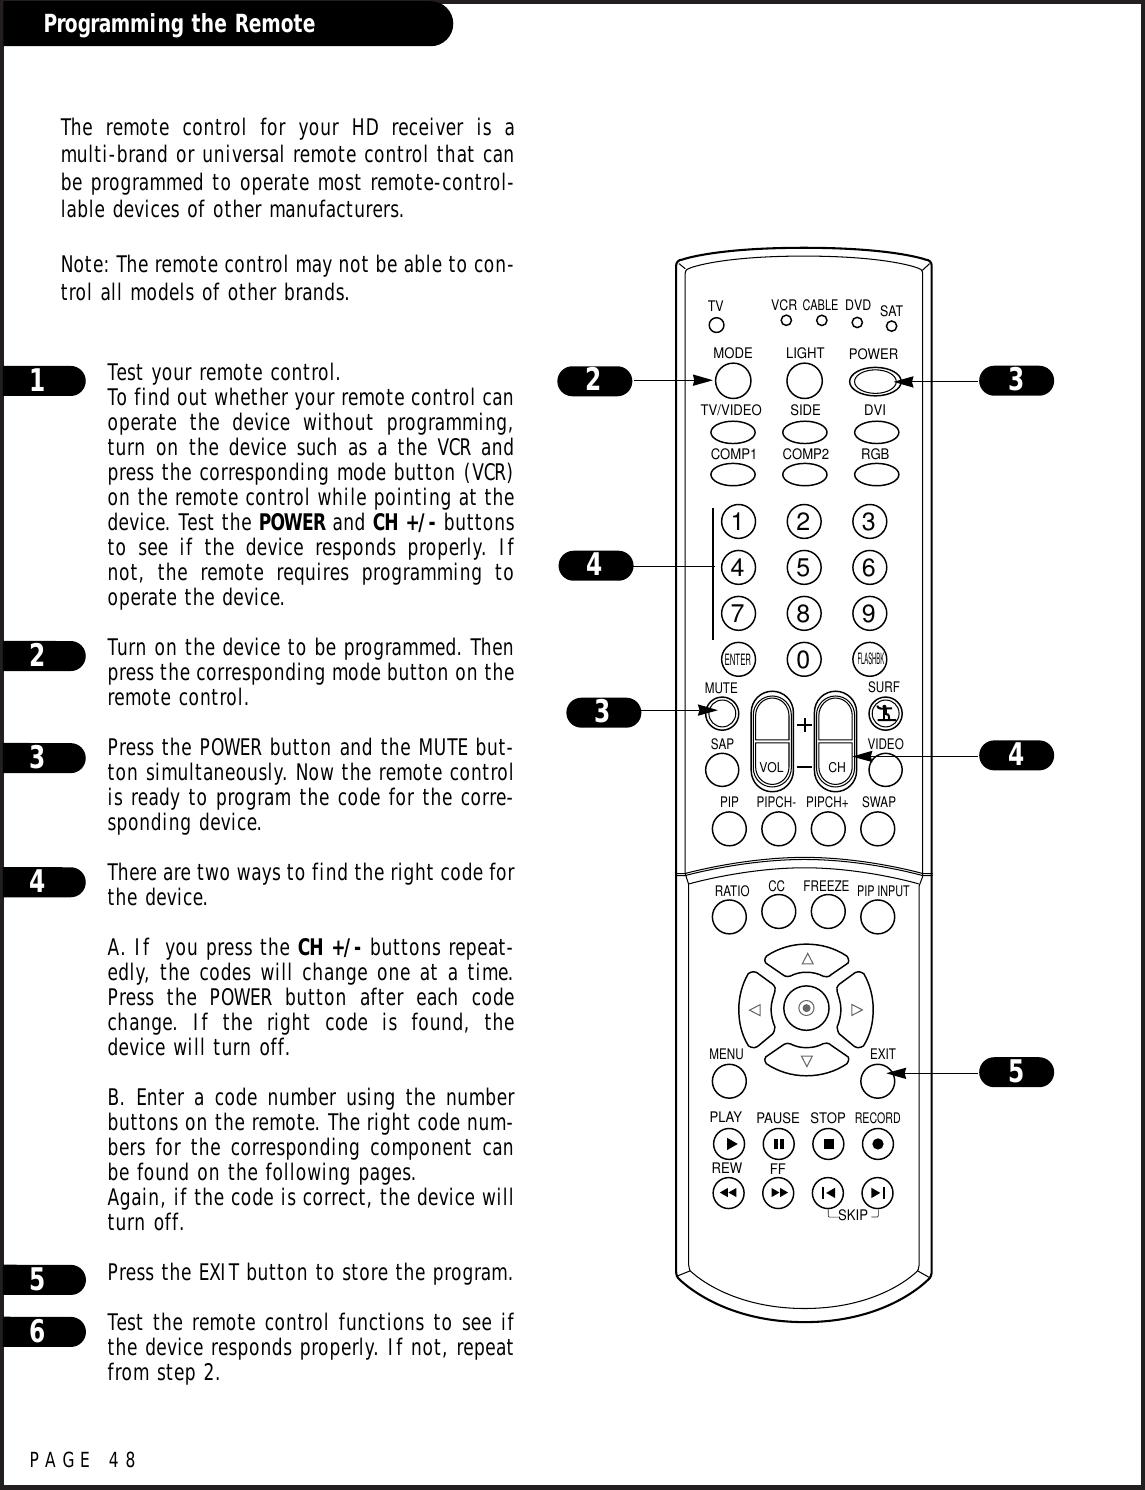 PAGE 48Programming the RemoteTest your remote control.To find out whether your remote control canoperate the device without programming,turn on the device such as a the VCR andpress the corresponding mode button (VCR)on the remote control while pointing at thedevice. Test the POWER and CH +/- buttonsto see if the device responds properly. Ifnot, the remote requires programming tooperate the device.Turn on the device to be programmed. Thenpress the corresponding mode button on theremote control.Press the POWER button and the MUTE but-ton simultaneously. Now the remote controlis ready to program the code for the corre-sponding device.There are two ways to find the right code forthe device.A. If  you press the CH +/- buttons repeat-edly, the codes will change one at a time.Press the POWER button after each codechange. If the right code is found, thedevice will turn off.B. Enter a code number using the numberbuttons on the remote. The right code num-bers for the corresponding component canbe found on the following pages.Again, if the code is correct, the device willturn off.Press the EXIT button to store the program.Test the remote control functions to see ifthe device responds properly. If not, repeatfrom step 2.11234567890TVMODE LIGHT POWER   TV/VIDEO DVIRGBVCRCABLEDVD SATMUTESWAPPIPCH- PIPCH+PIPRATIORECORDSTOPPAUSEREWPLAYFFMENU EXITCC FREEZEPIP INPUTVOL CHSURFSAP VIDEOCOMP2COMP1SIDESKIPENTERFLASHBK2 3453234564The remote control for your HD receiver is amulti-brand or universal remote control that canbe programmed to operate most remote-control-lable devices of other manufacturers.Note: The remote control may not be able to con-trol all models of other brands.